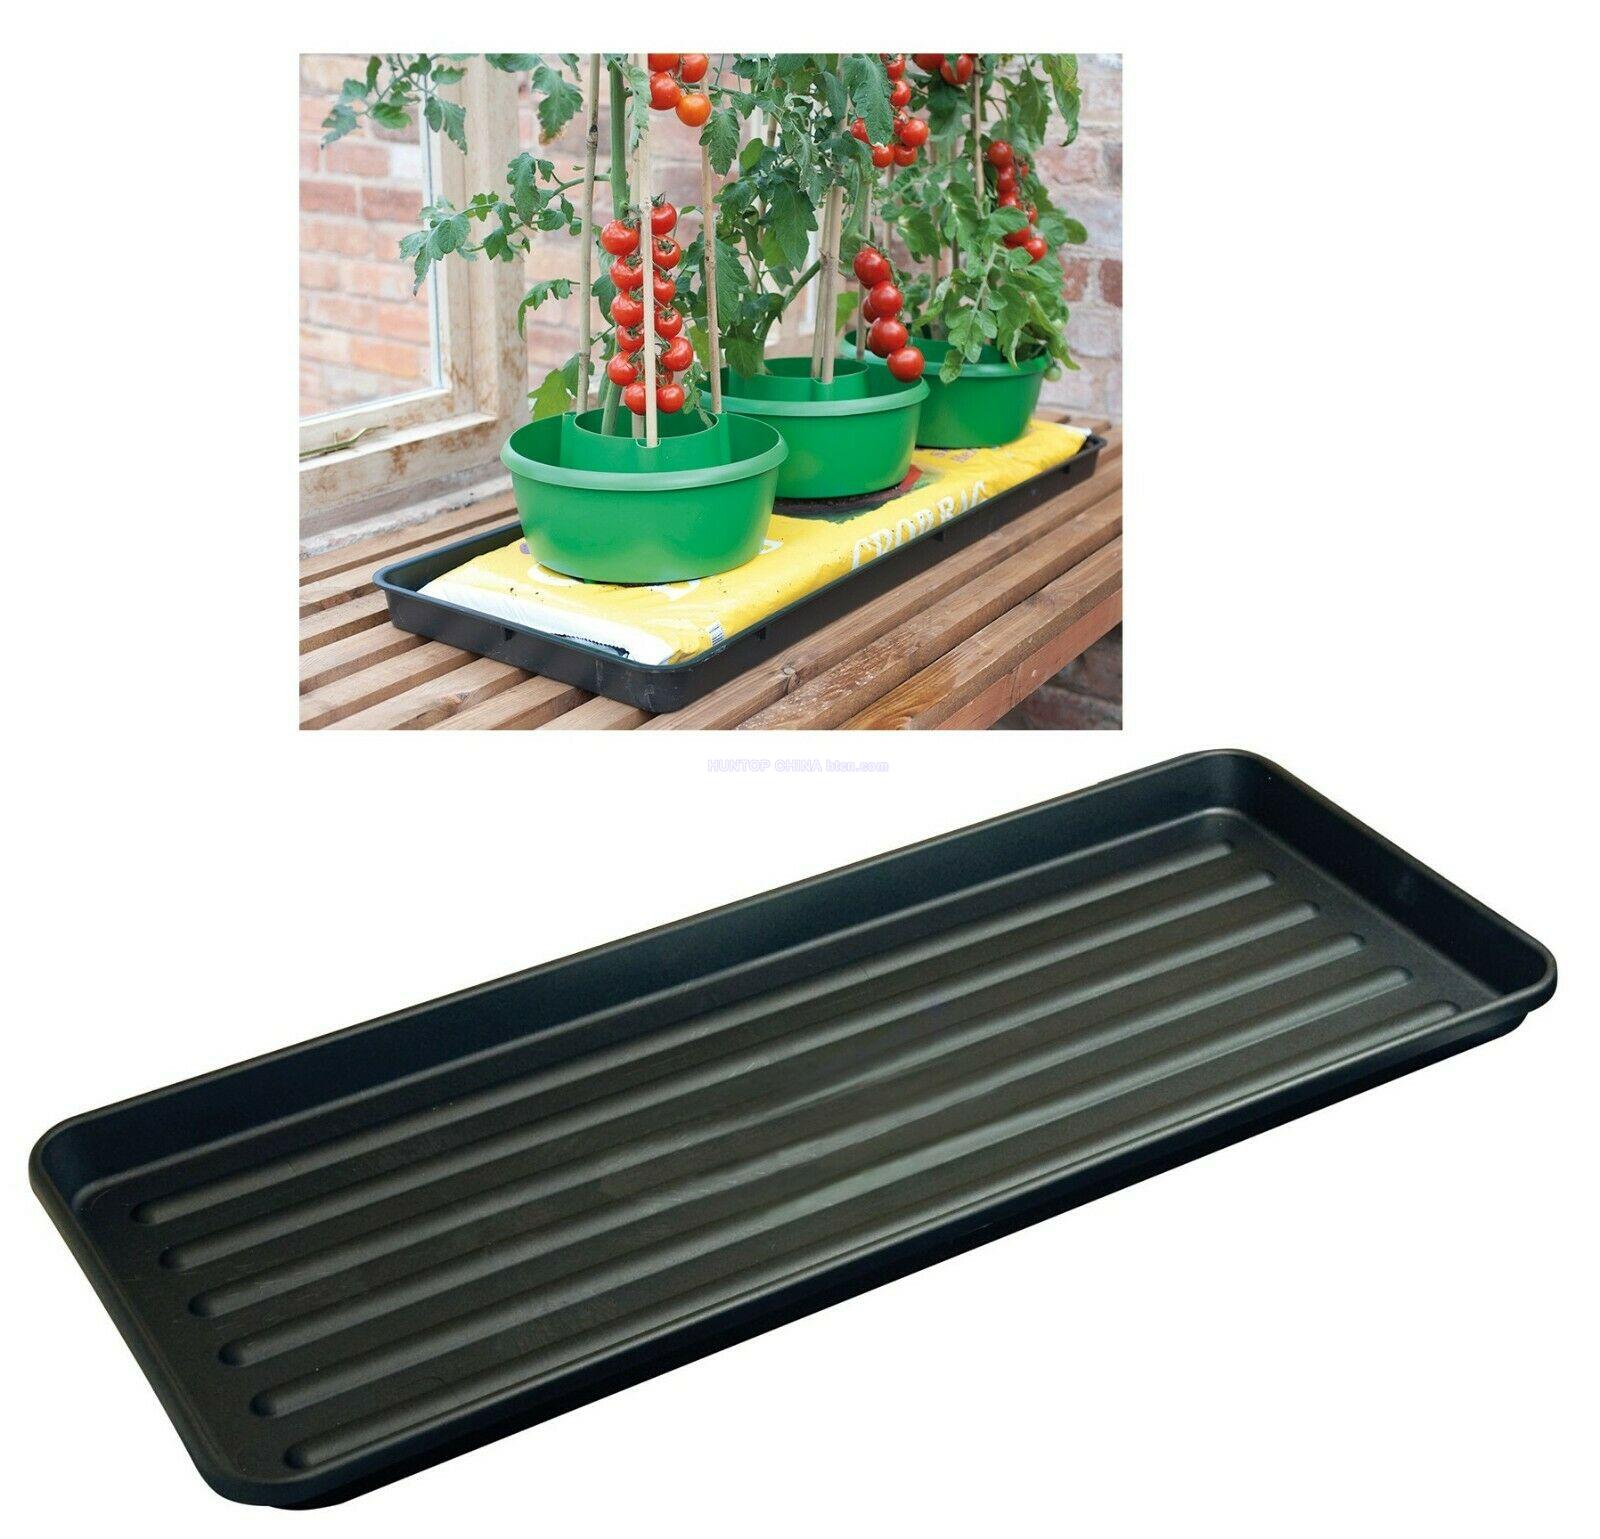 China Self Watering Tray Plant Grow Bag Trays Growbags Tray Plant Halos Pots HT4111 China factory manufacturer supplier